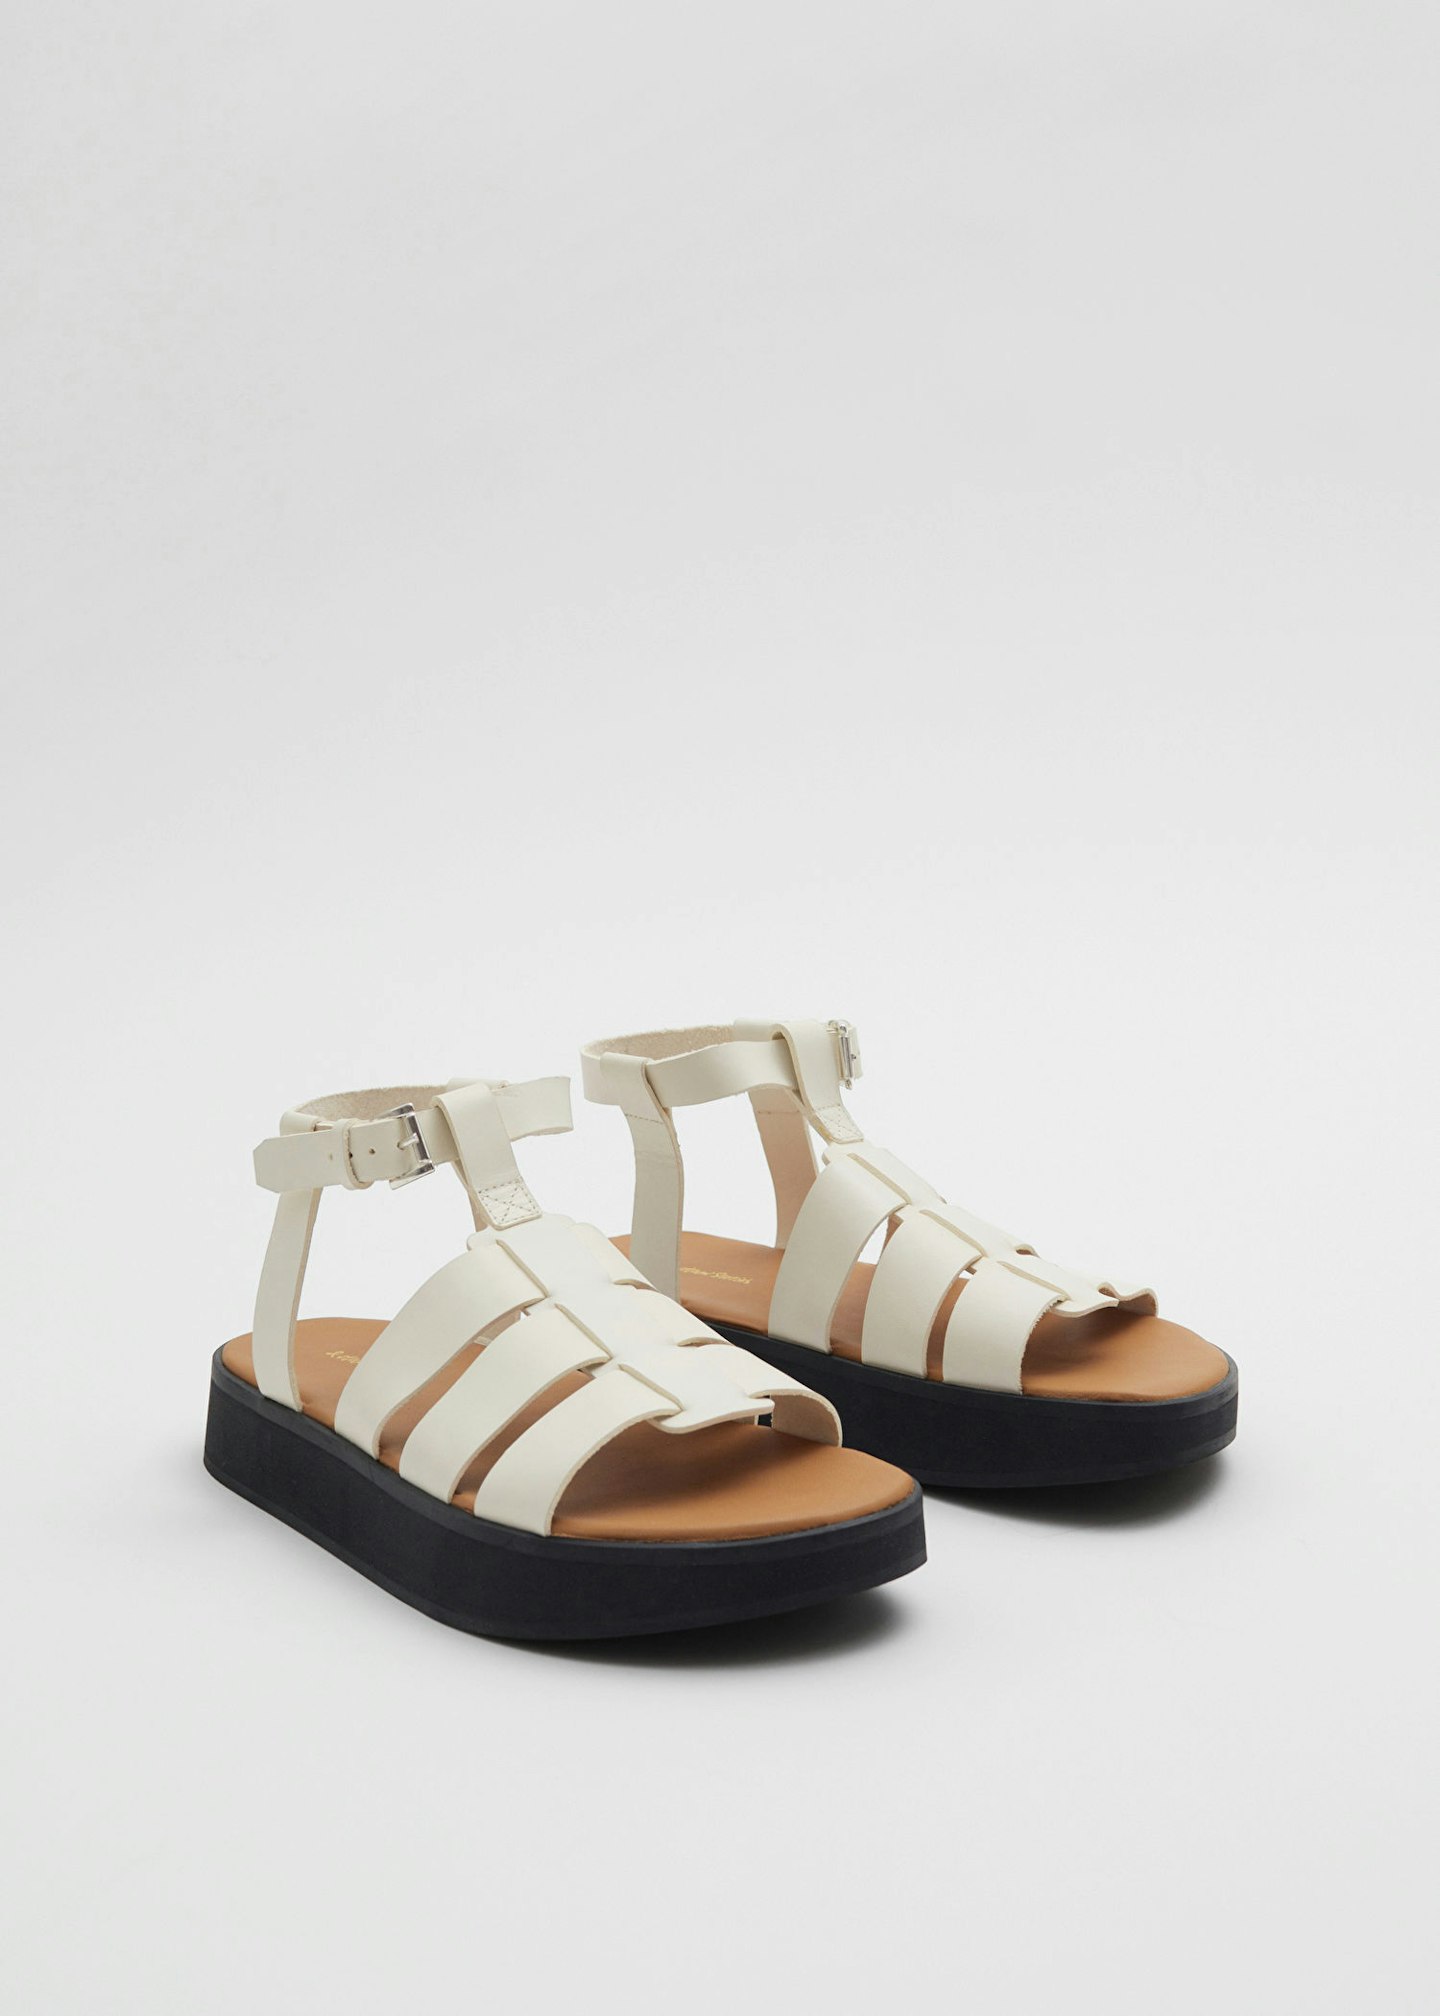 And Other Stories, Fisherman Leather Sandals